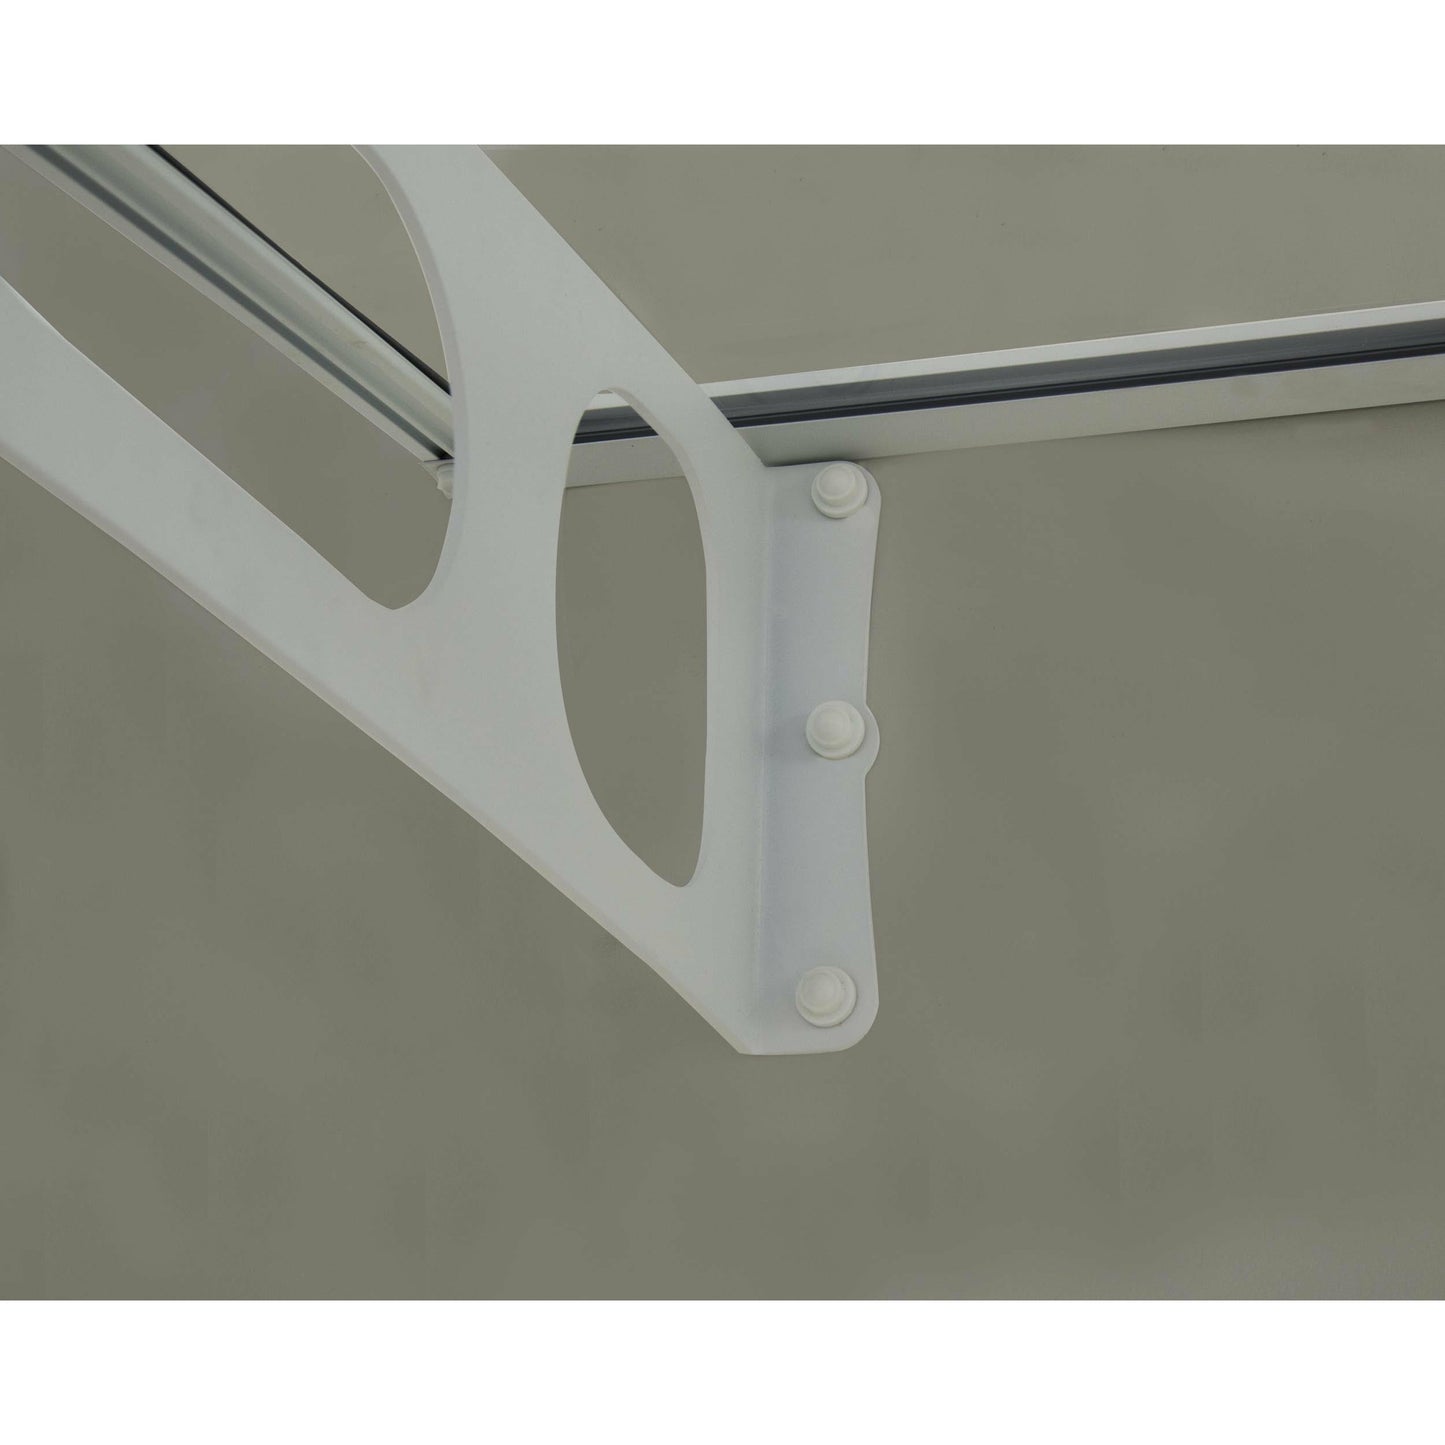 Palram Bordeaux 4460 Awning-Clear